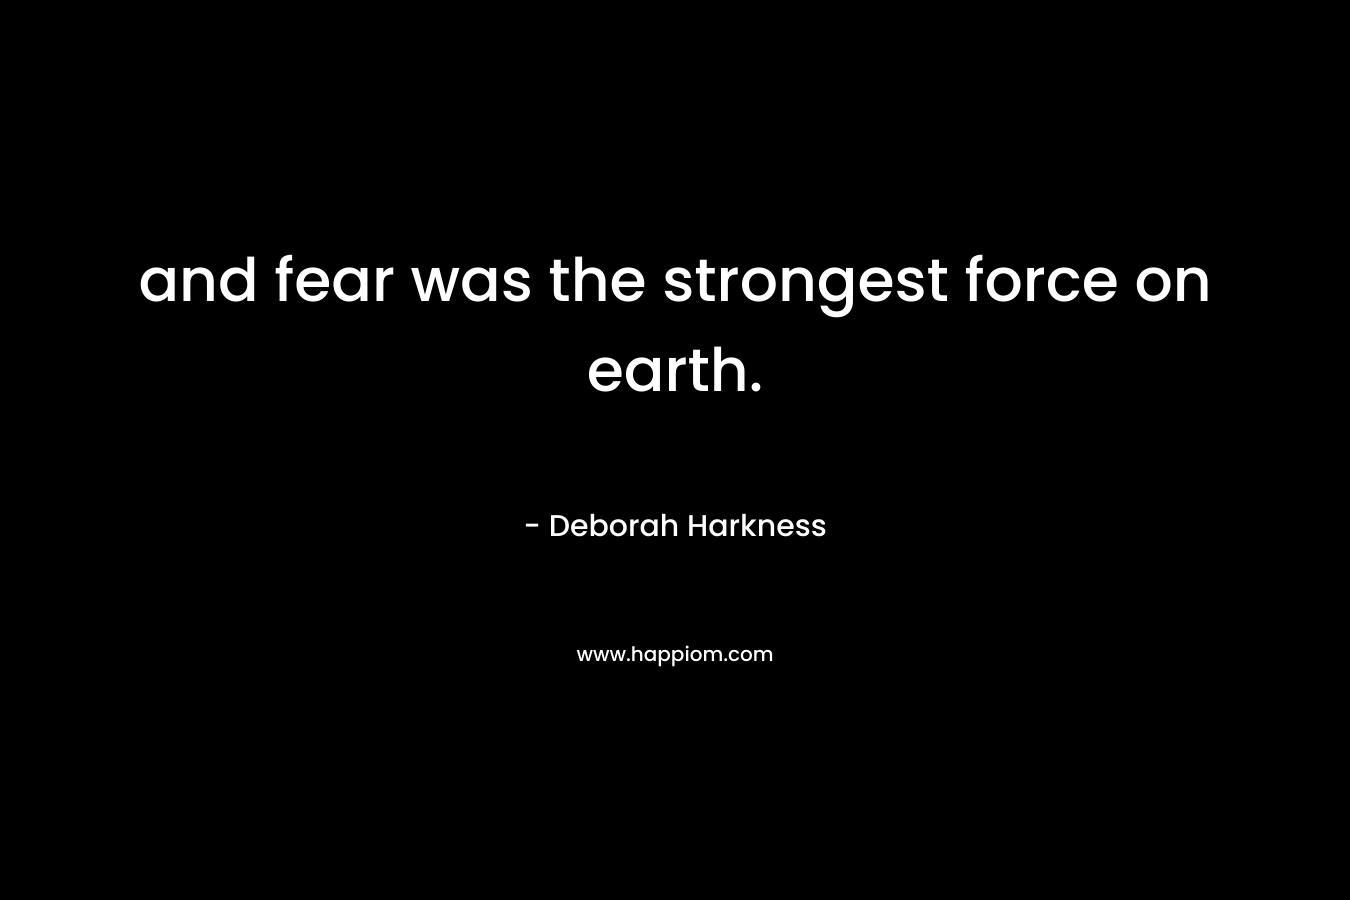 and fear was the strongest force on earth.